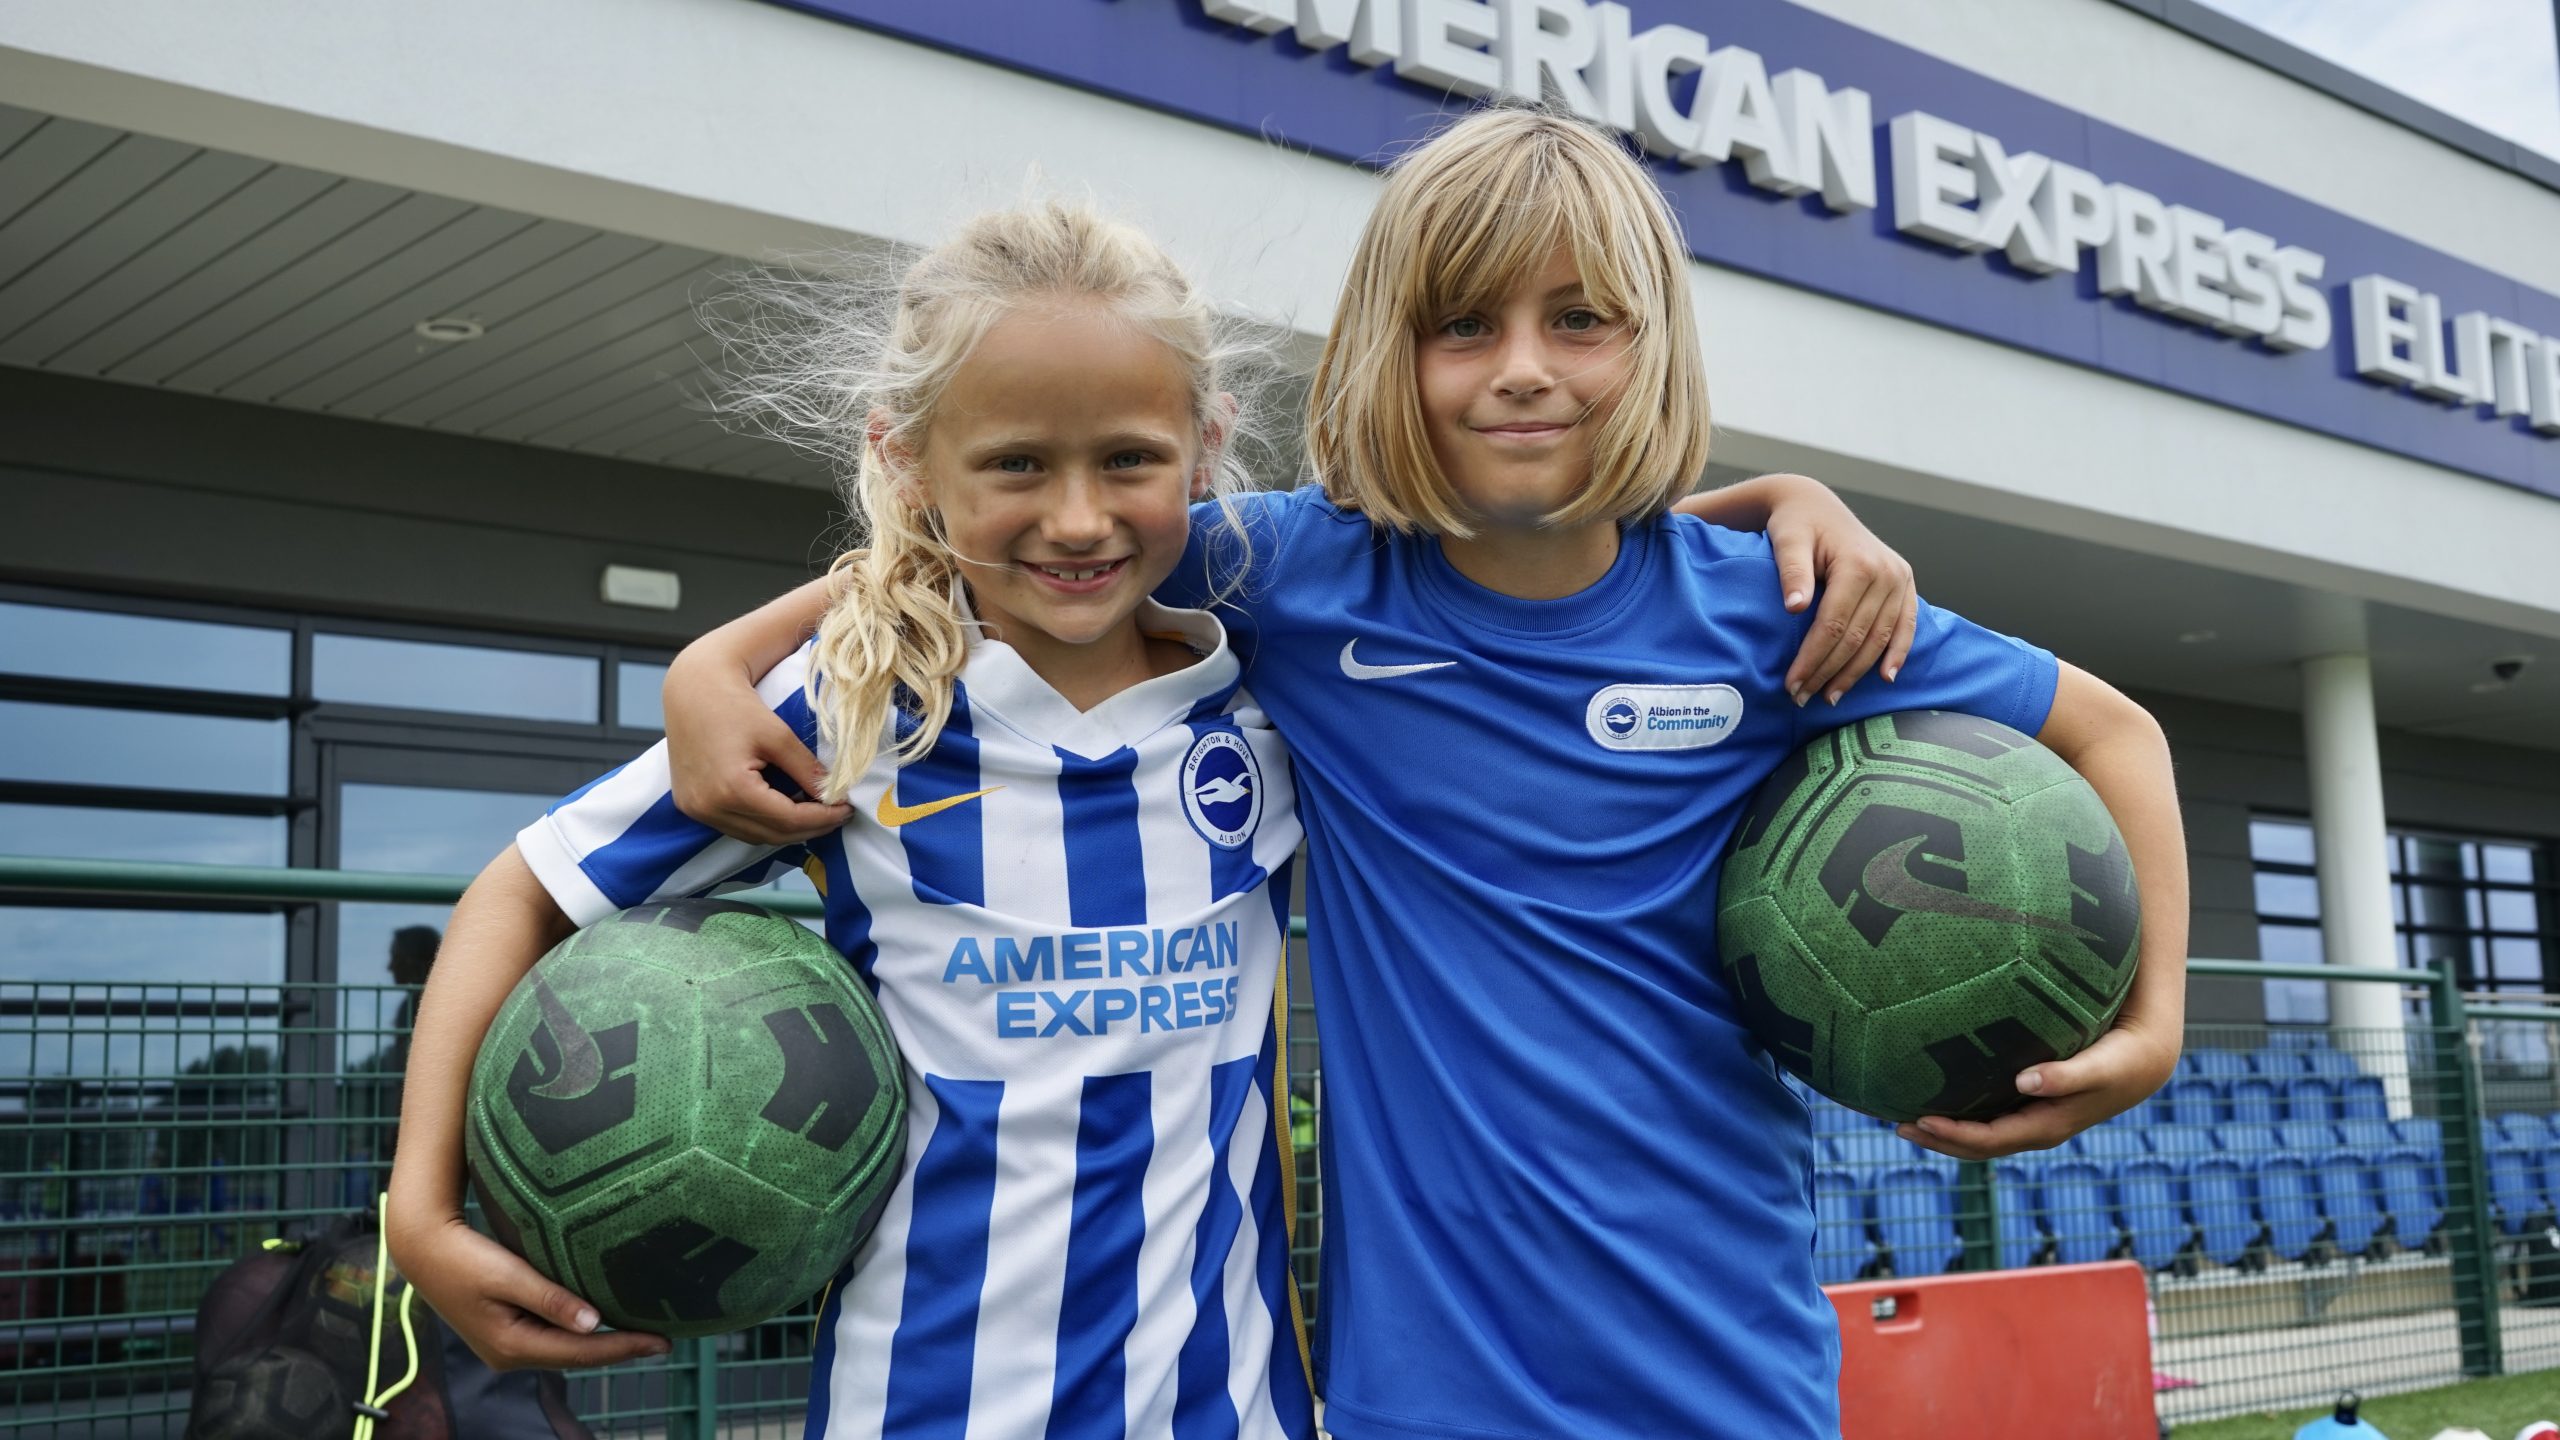 Double the amount of girls playing football in summer 2022